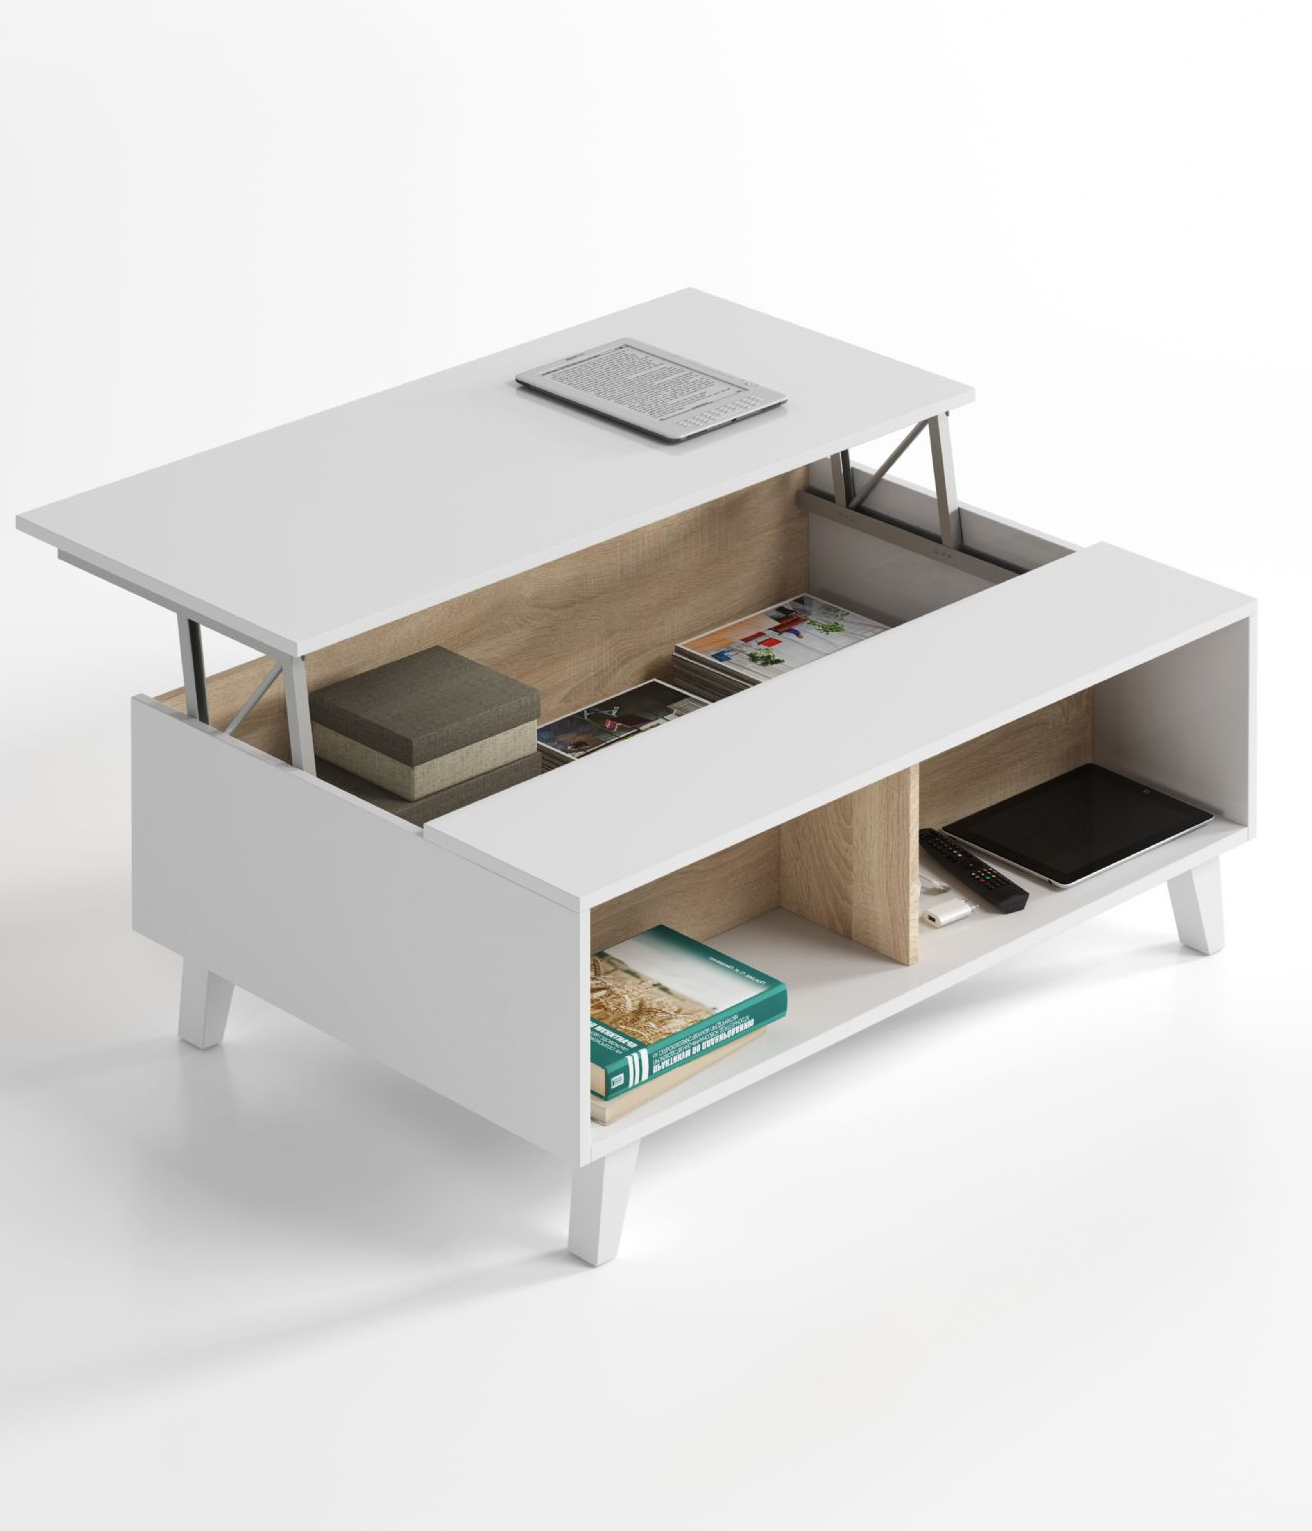 Bari Storage Coffee Table Soft White Gloss With Oak Effect throughout dimensions 1312 X 1531